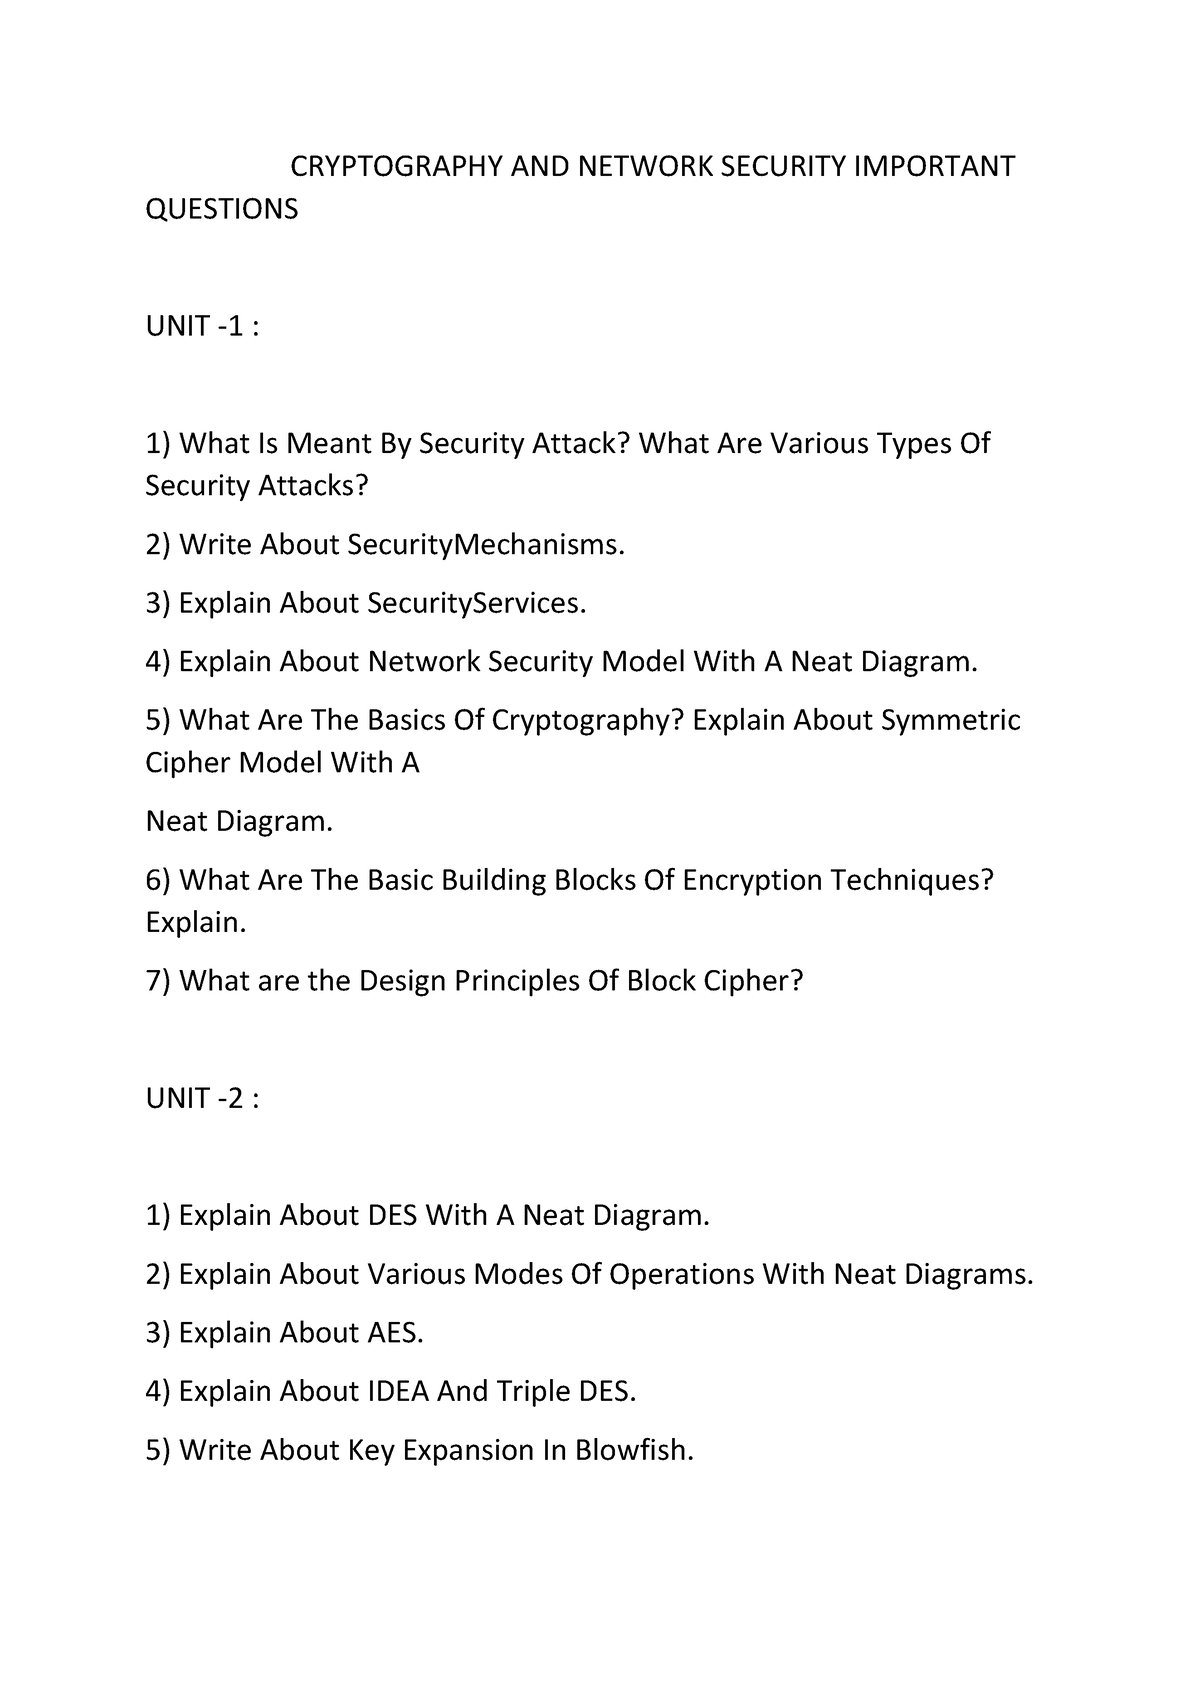 assignment questions on cryptography and network security